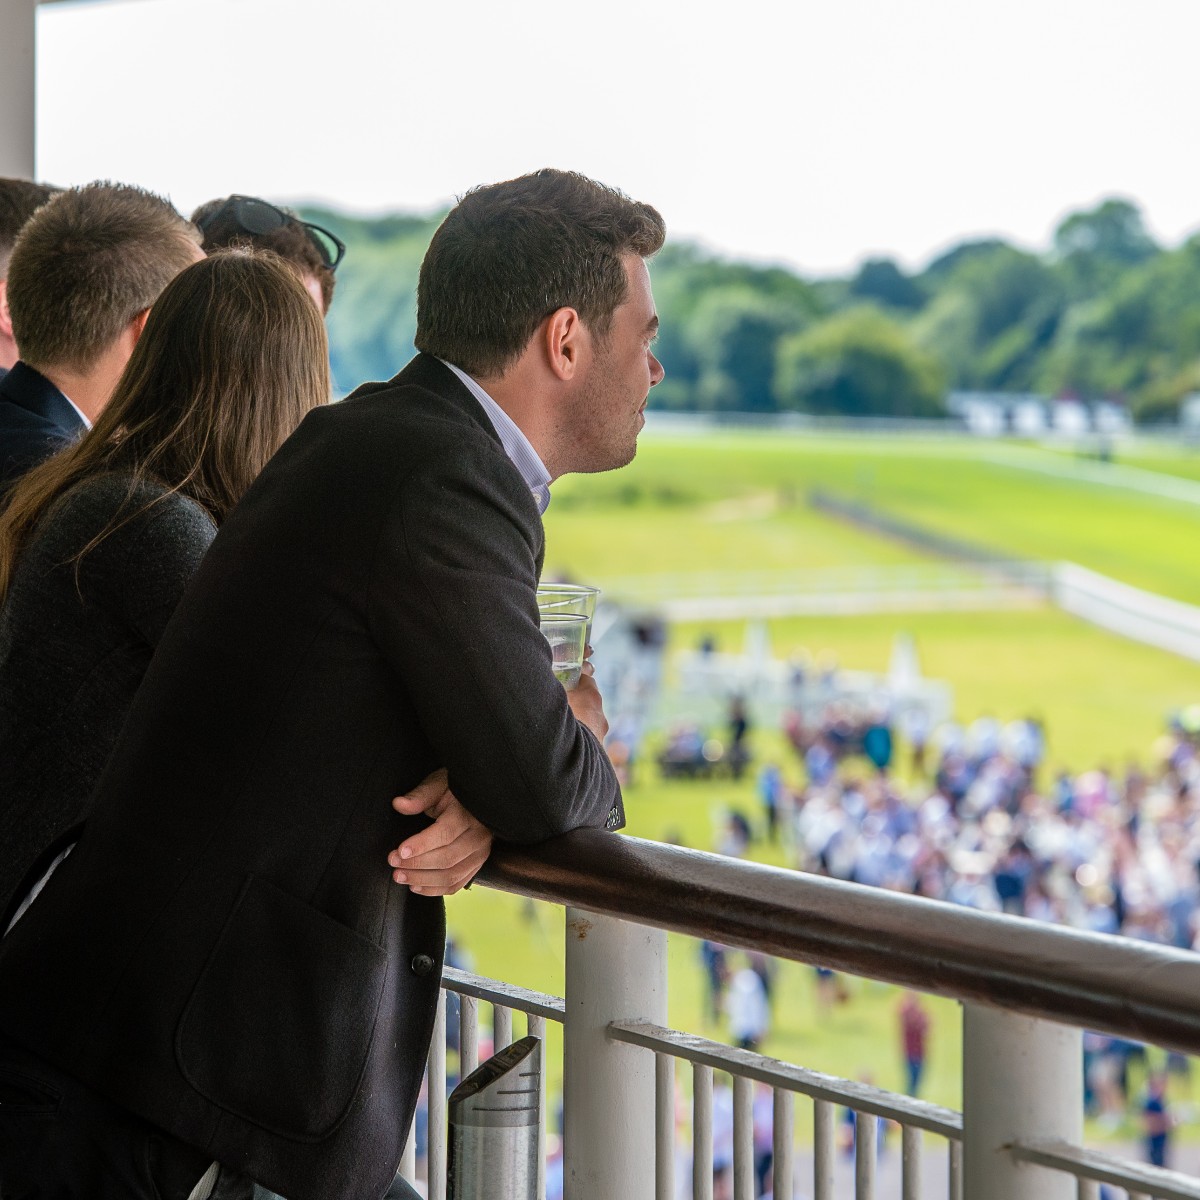 For the best views of the track - Premier Viewing is where you NEED to be!🤩

👀 Stunning balcony views
🎟️ Hospitality ticket
🏇 Shared suite with convenient bar & betting facilities
🥂 Welcome drink
📖 Raceday programme

All from just £45! >> windsor-racecourse.co.uk/whats-on